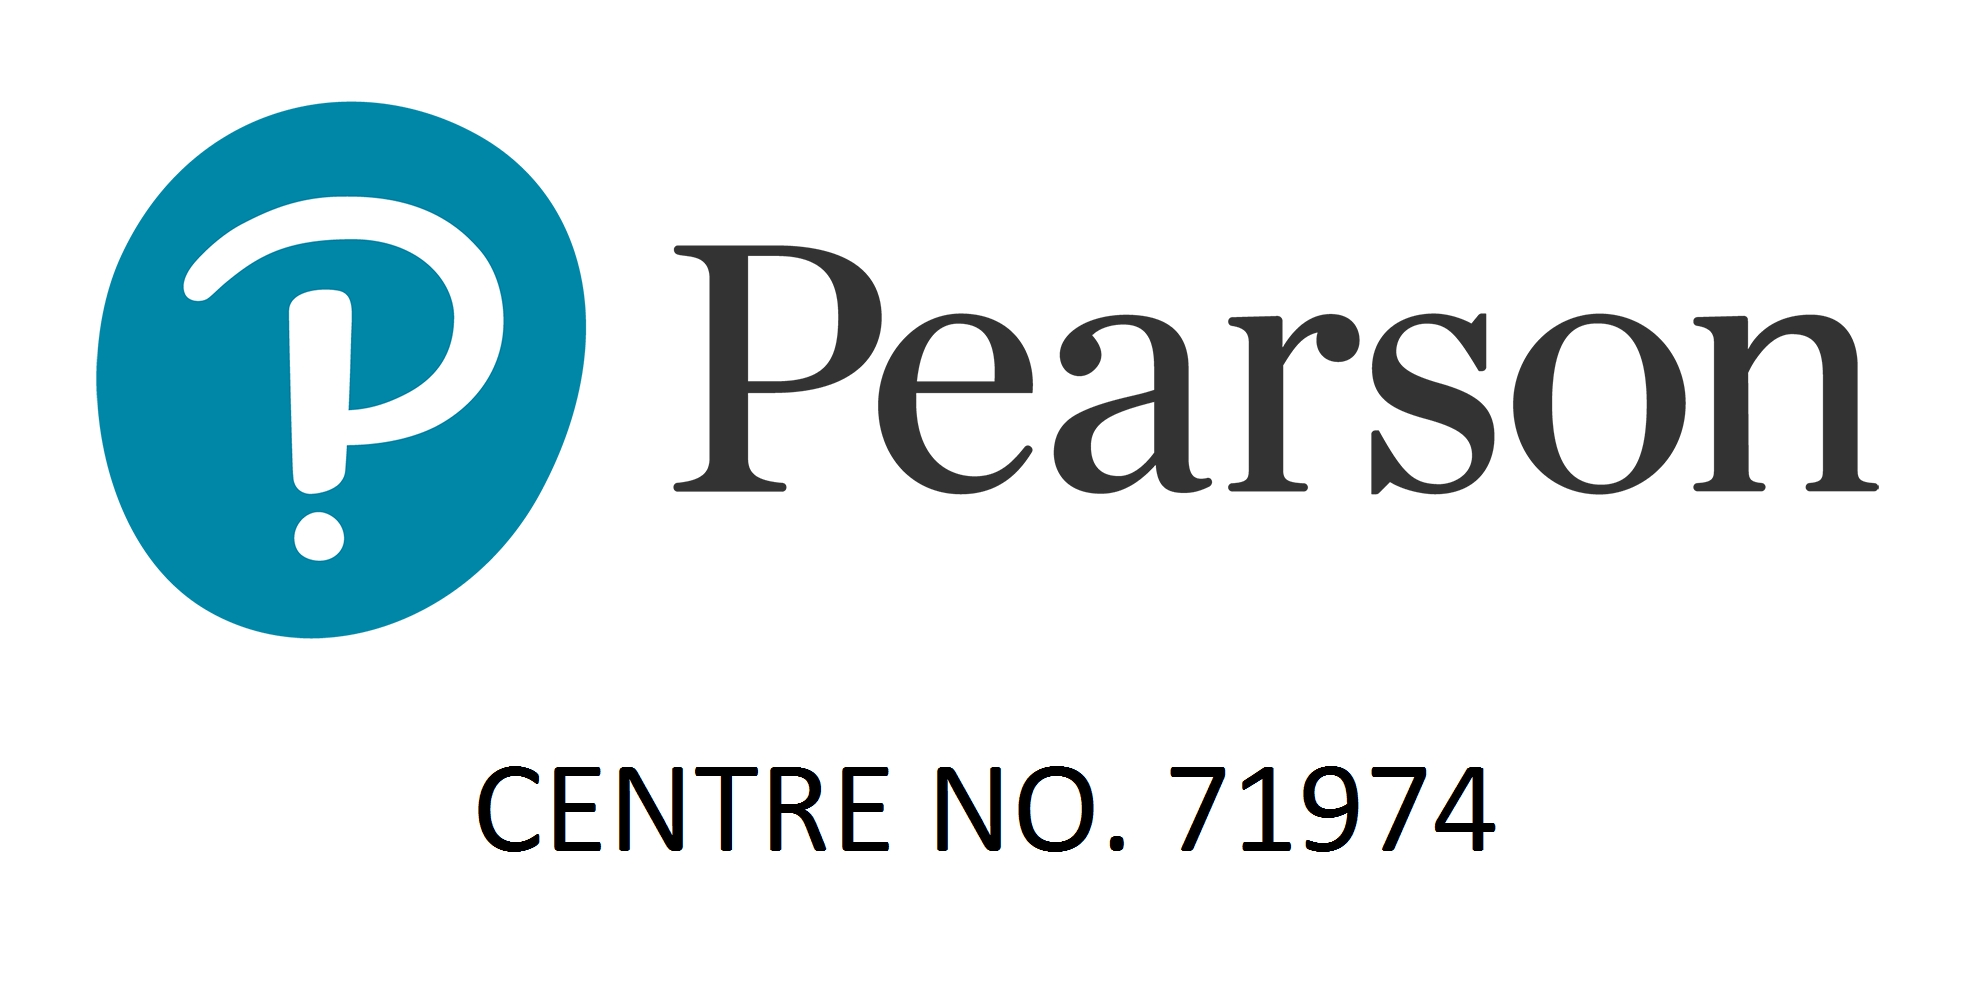 Brand New: New Logo and Identity for Pearson by Freemavens and Together  Design